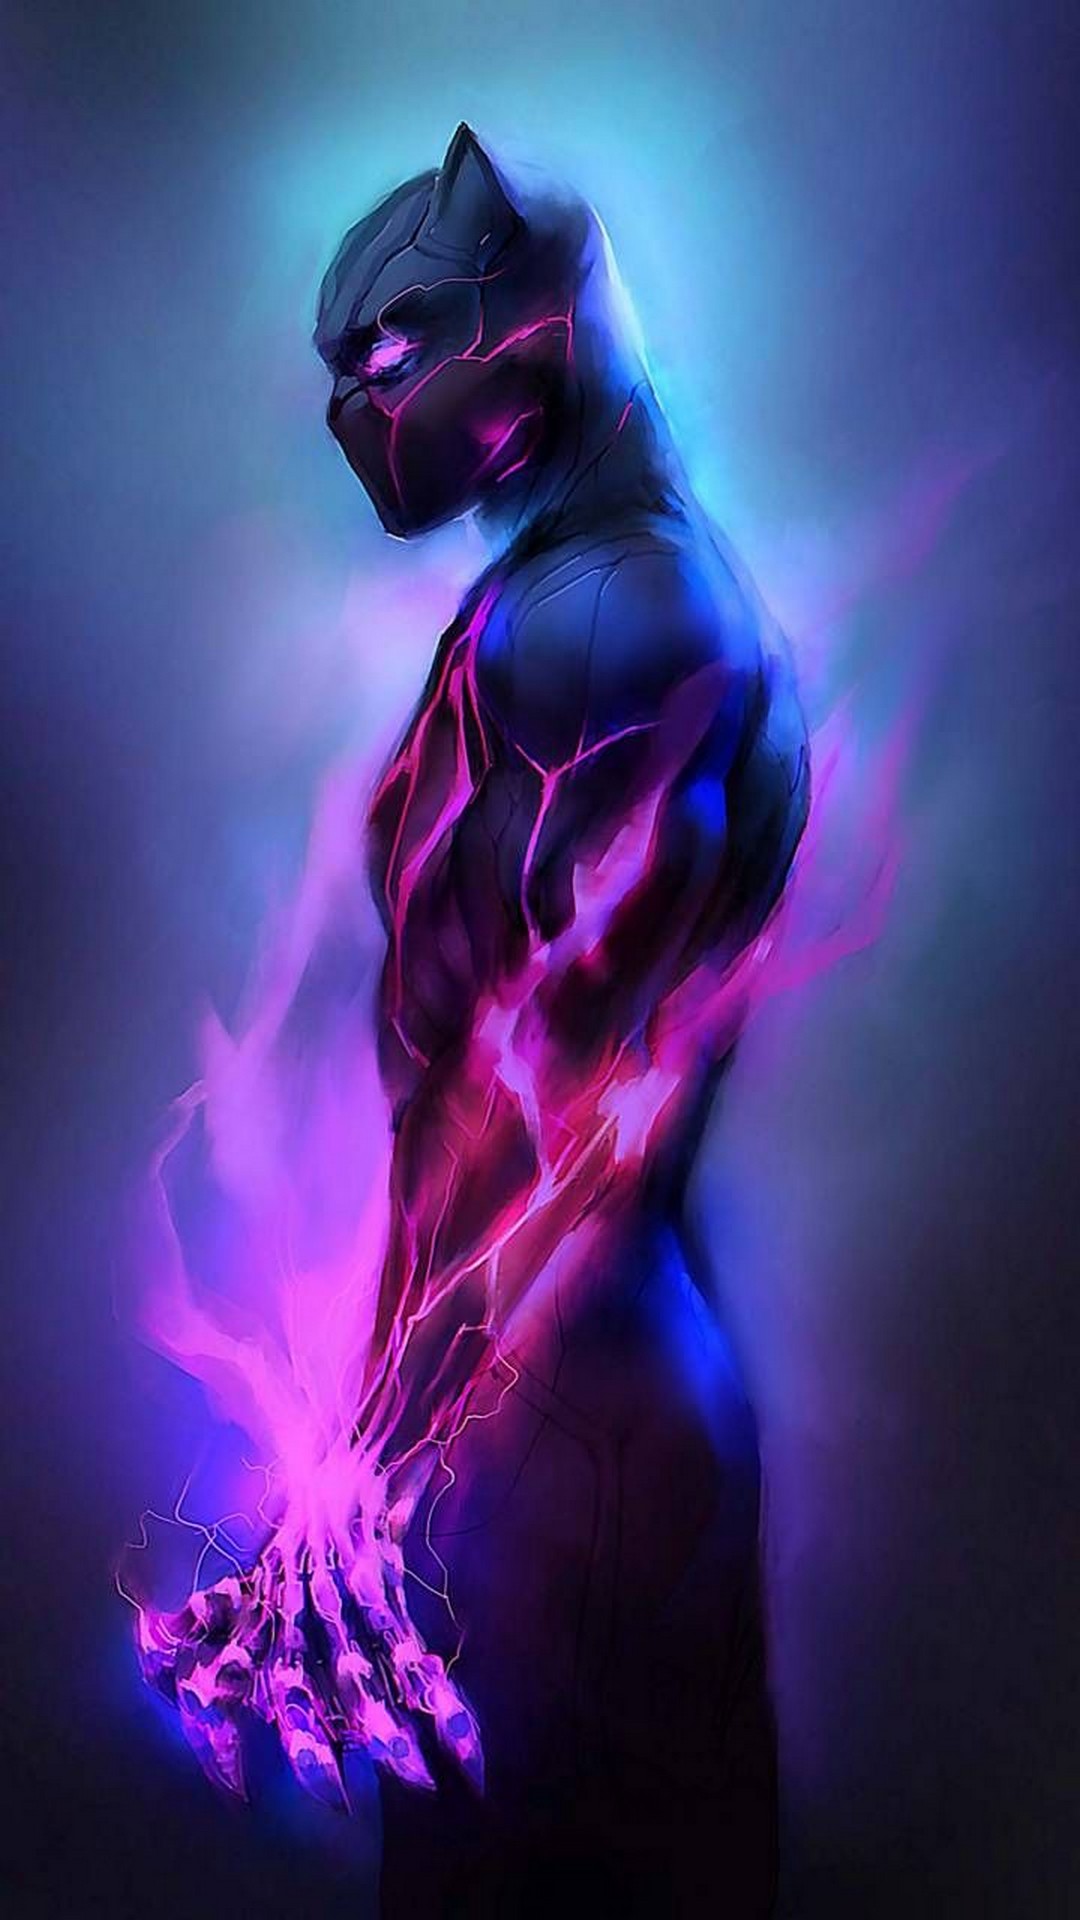 Black Panther Wallpaper For Phone HD with high-resolution 1080x1920 pixel. Download all Mobile Wallpapers and Use them as wallpapers for your iPhone, Tablet, iPad, Android and other mobile devices